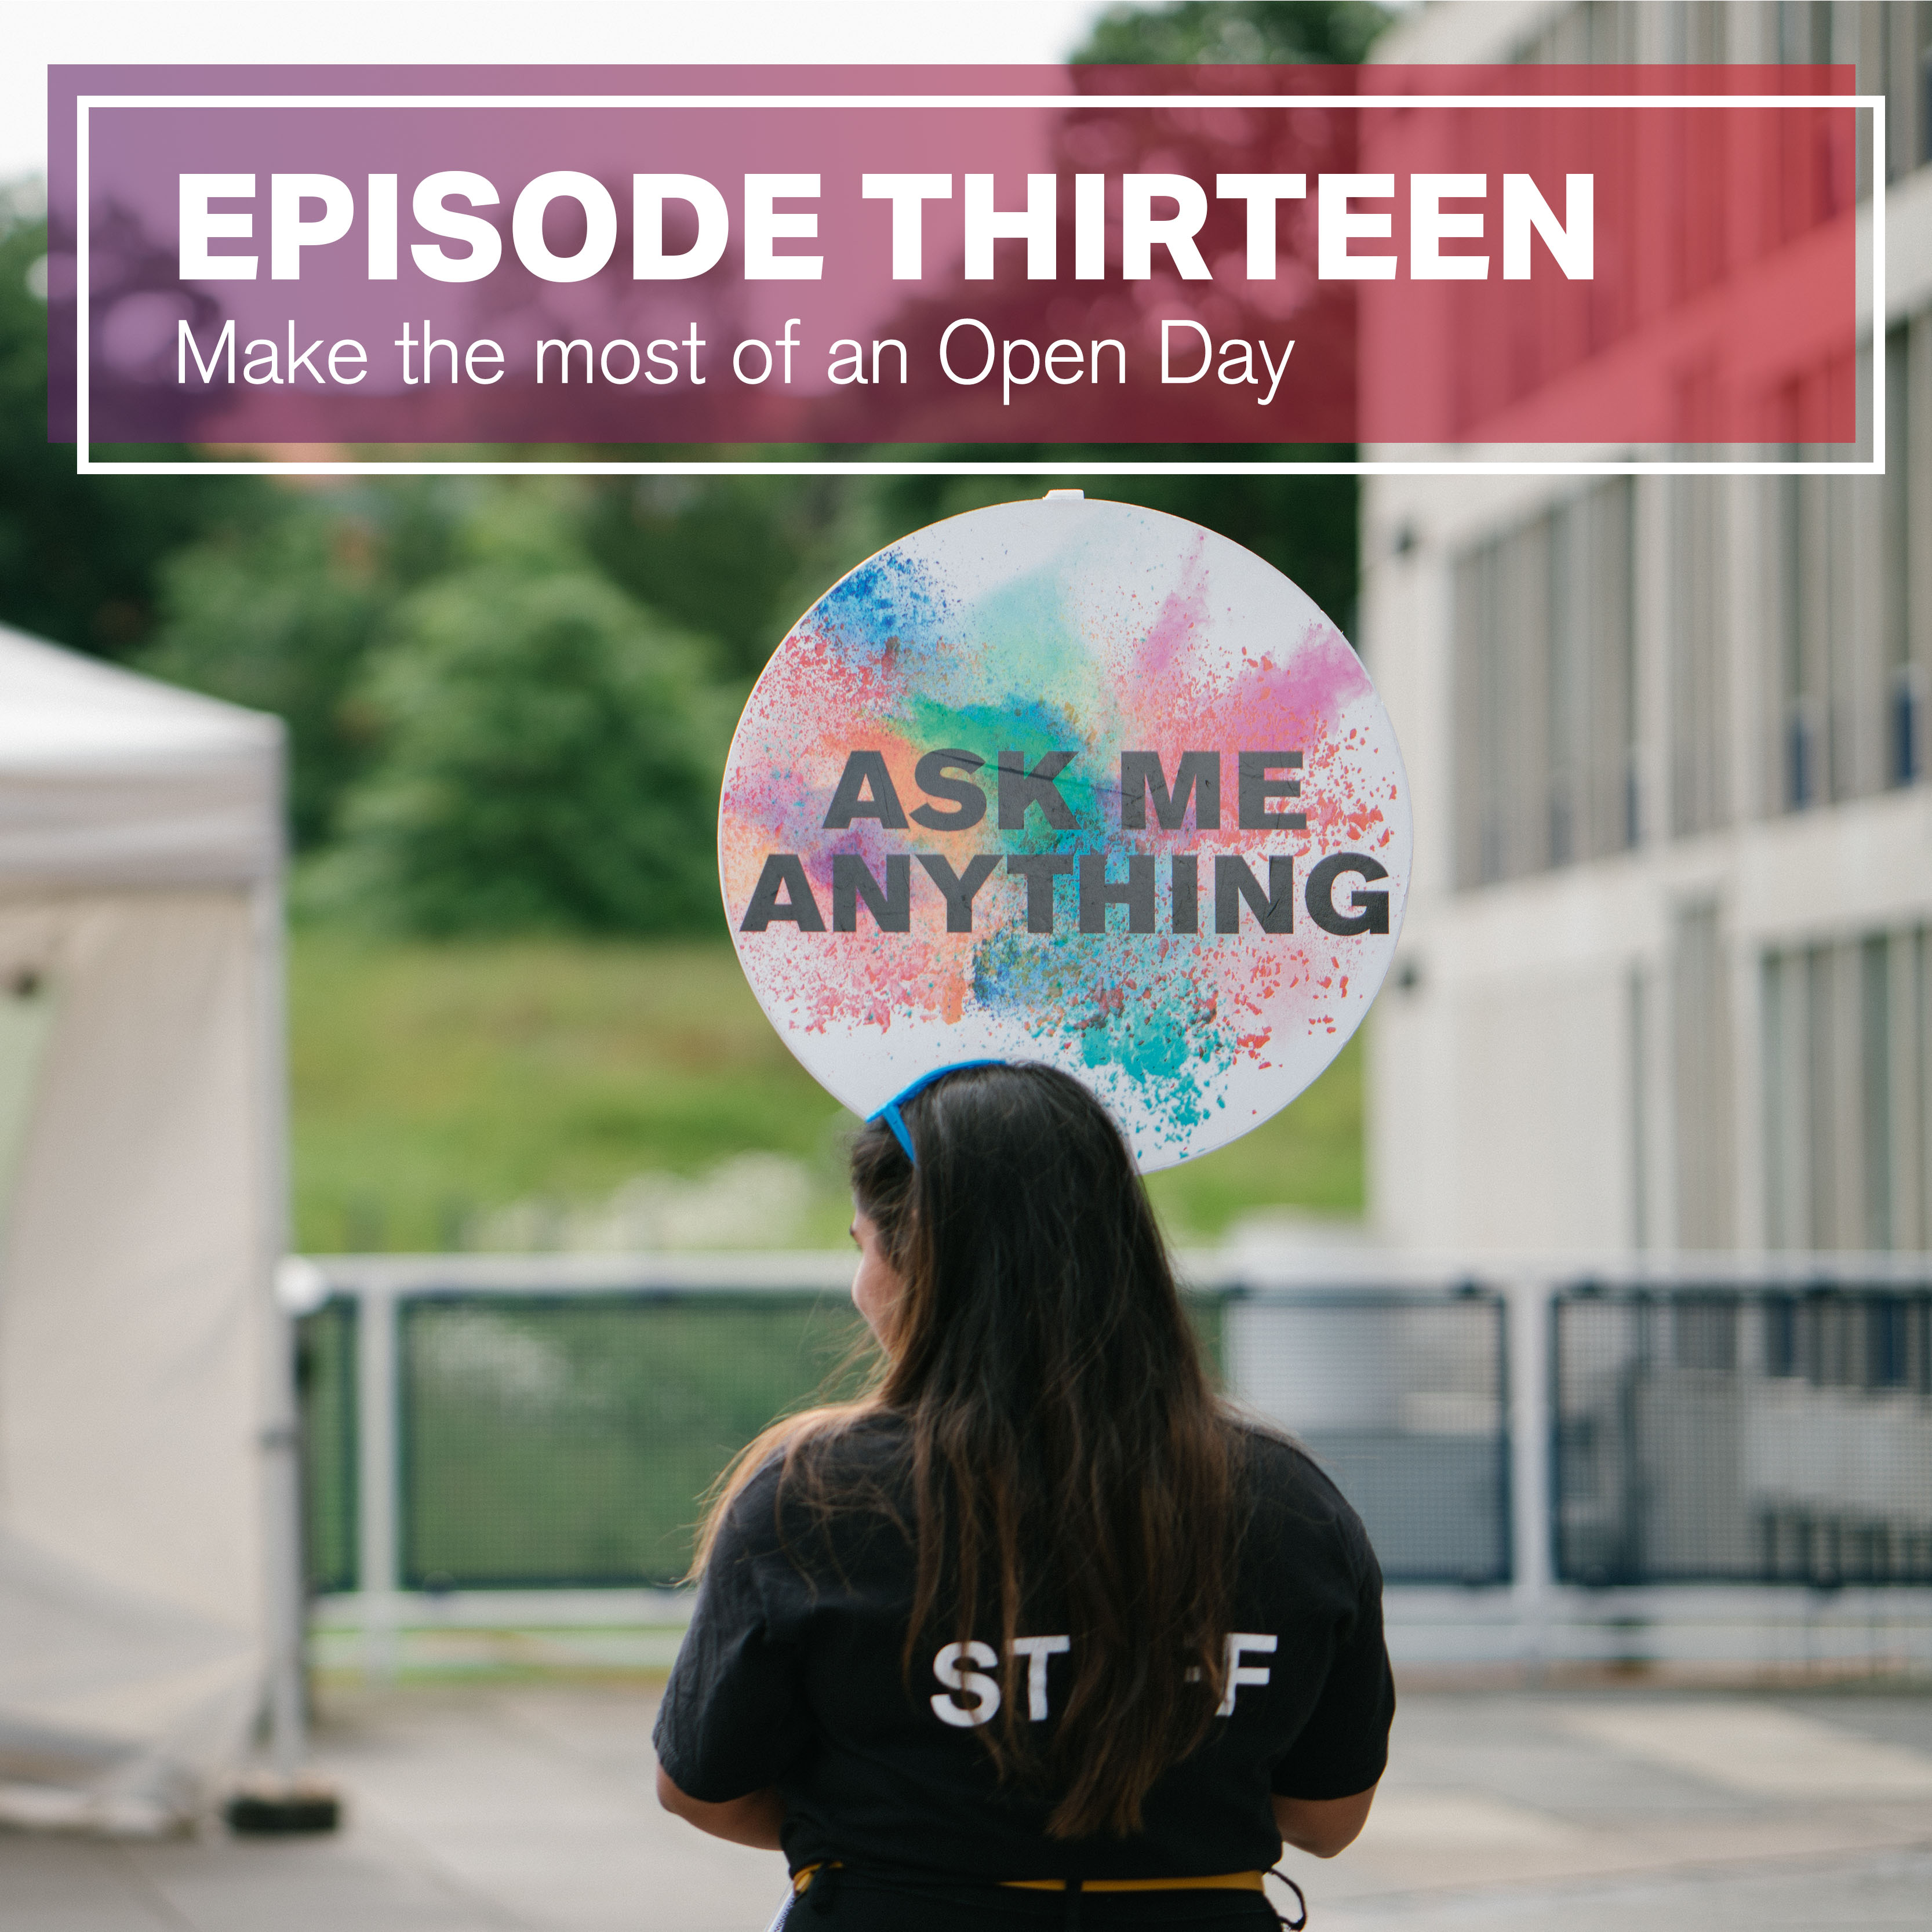 Make the most of an Open Day